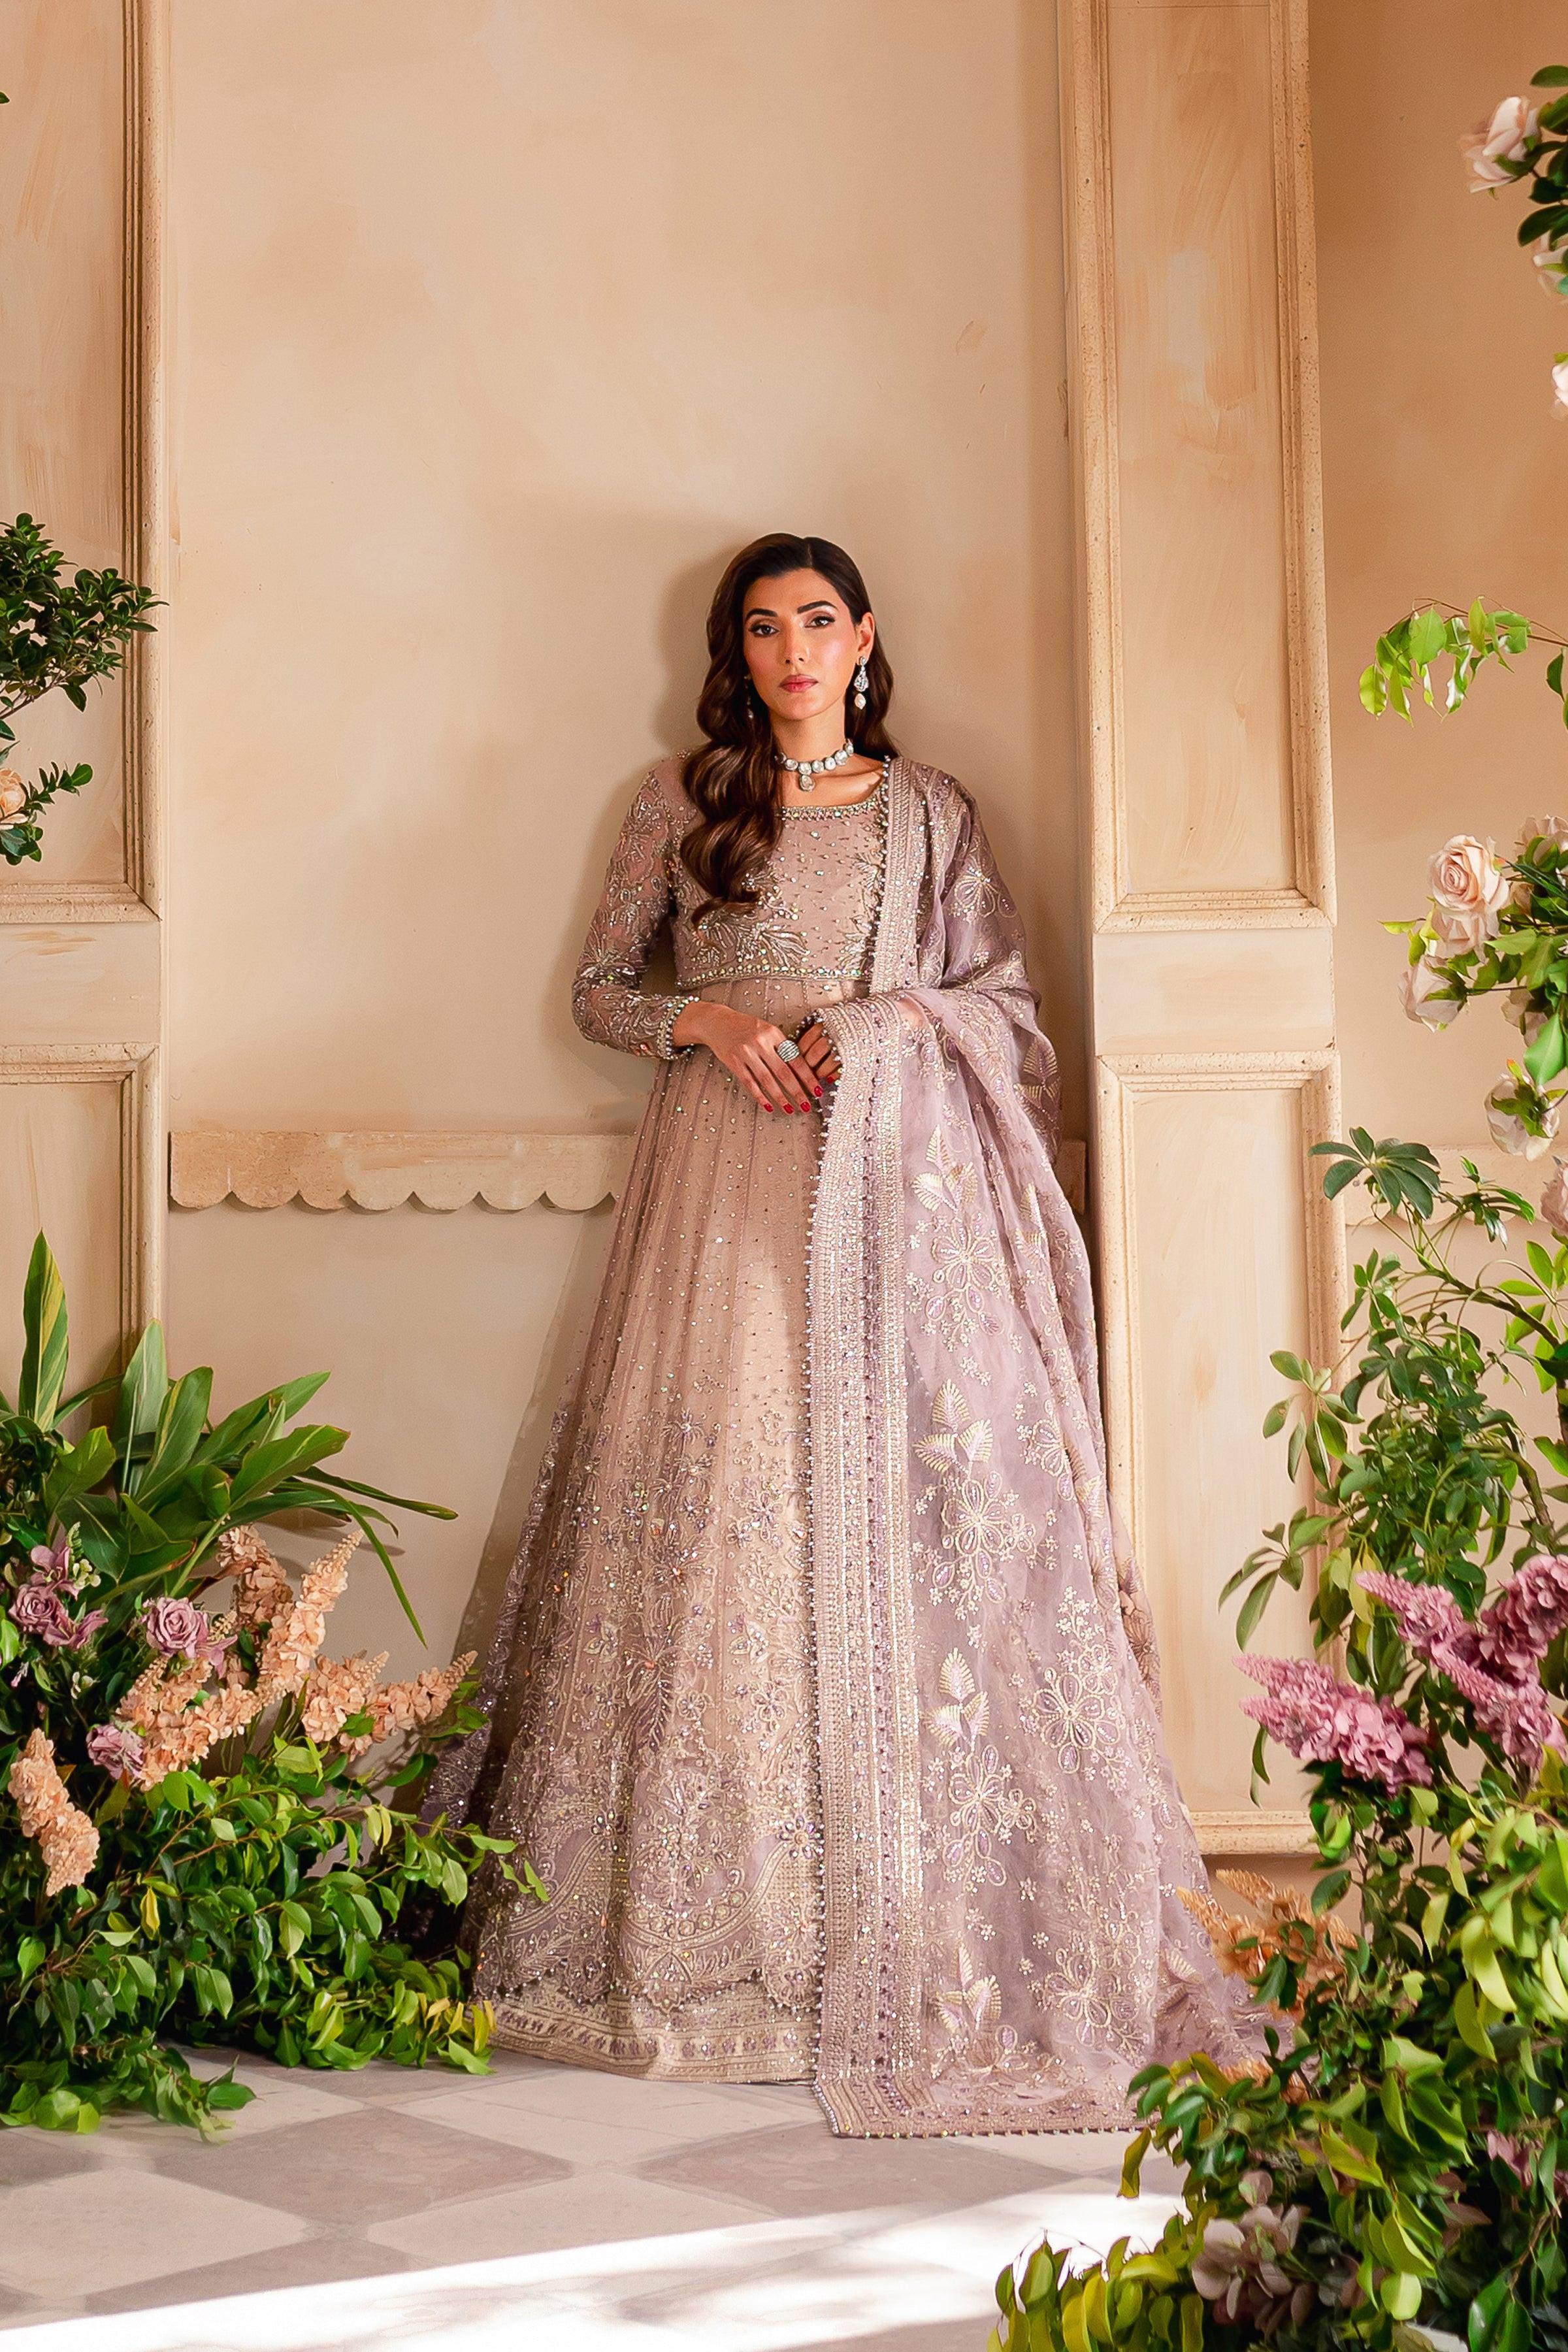 Net Christian Wedding Gowns & Bridal Dress, Ball gown at Rs 7500